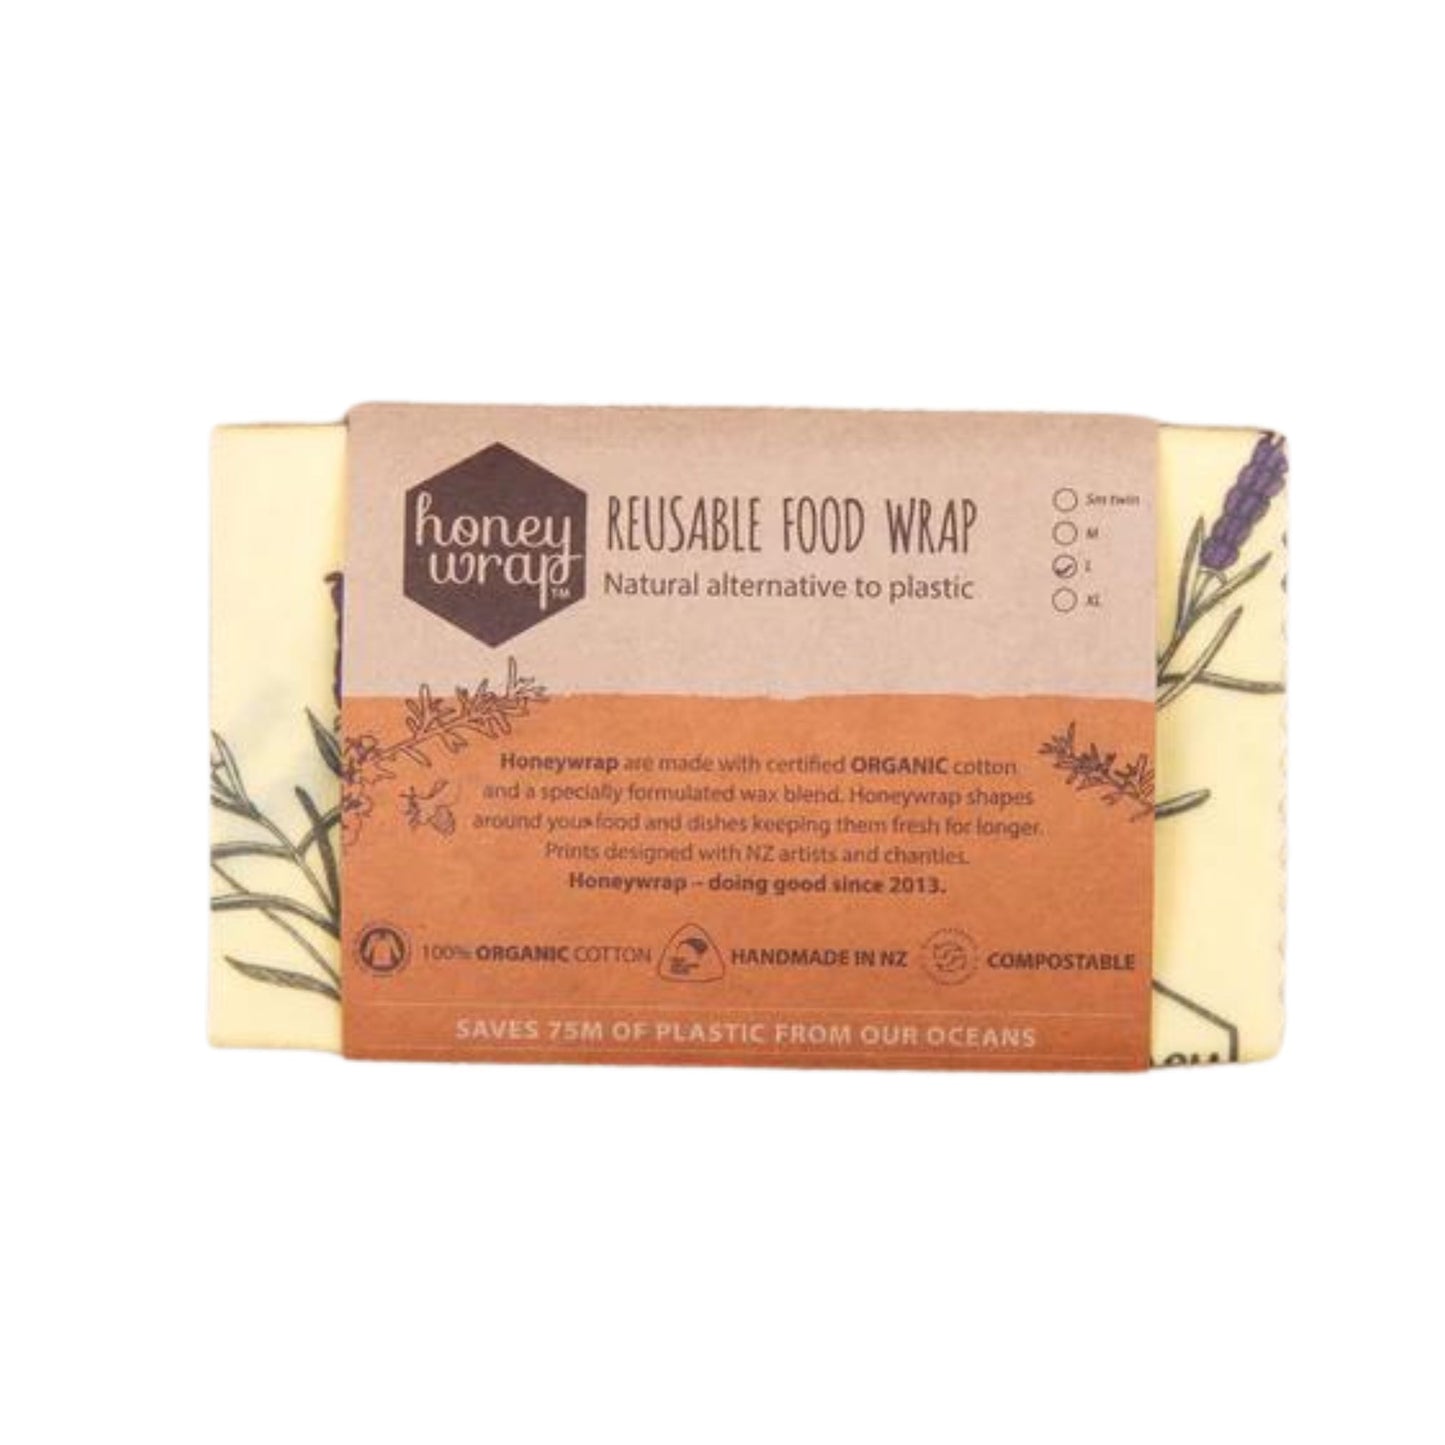 Honeywrap reusable food wrap made from organic cotton and a bees wax blend. Used to wrap over foods instead of using single use plastic.